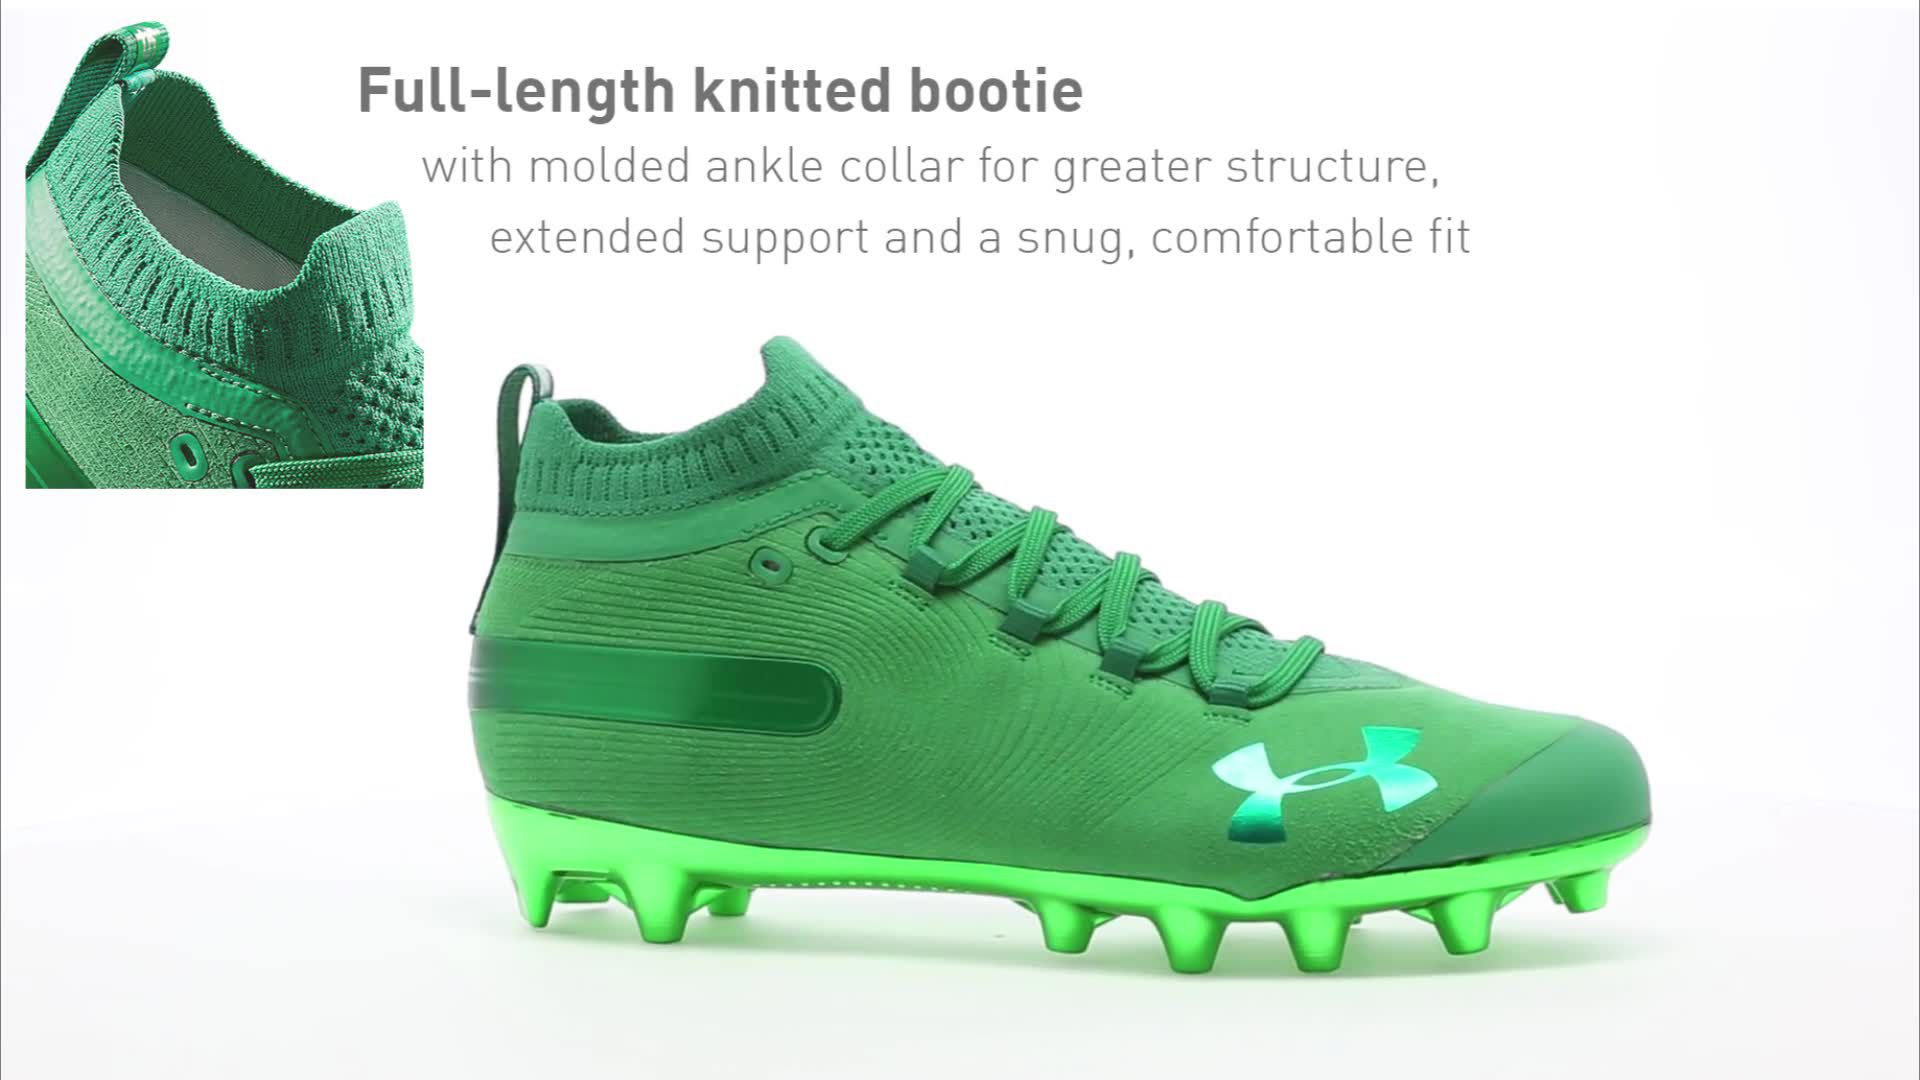 under armour cleats green